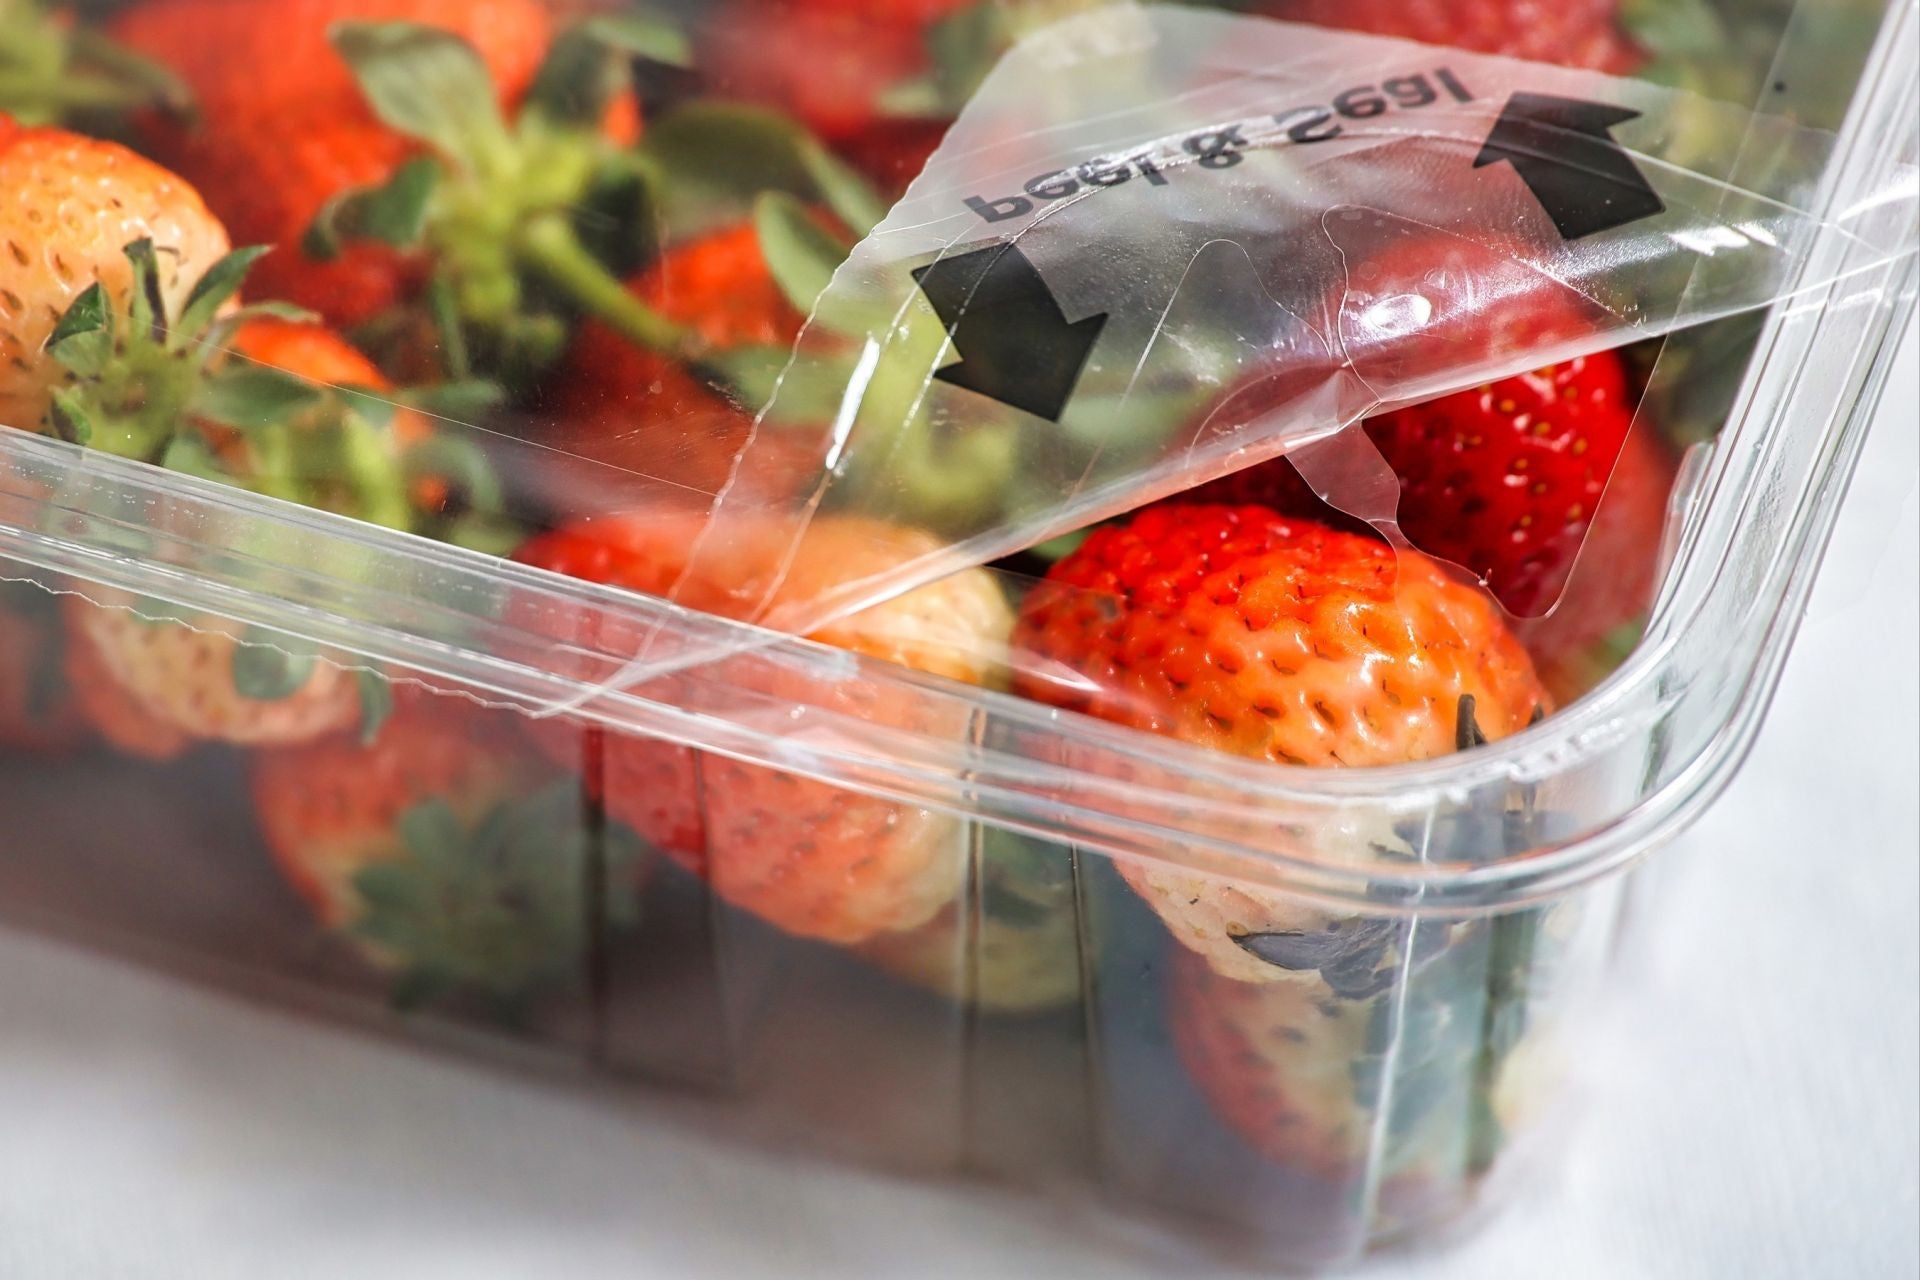 StePac develops recyclable top-seal produce packaging solutions